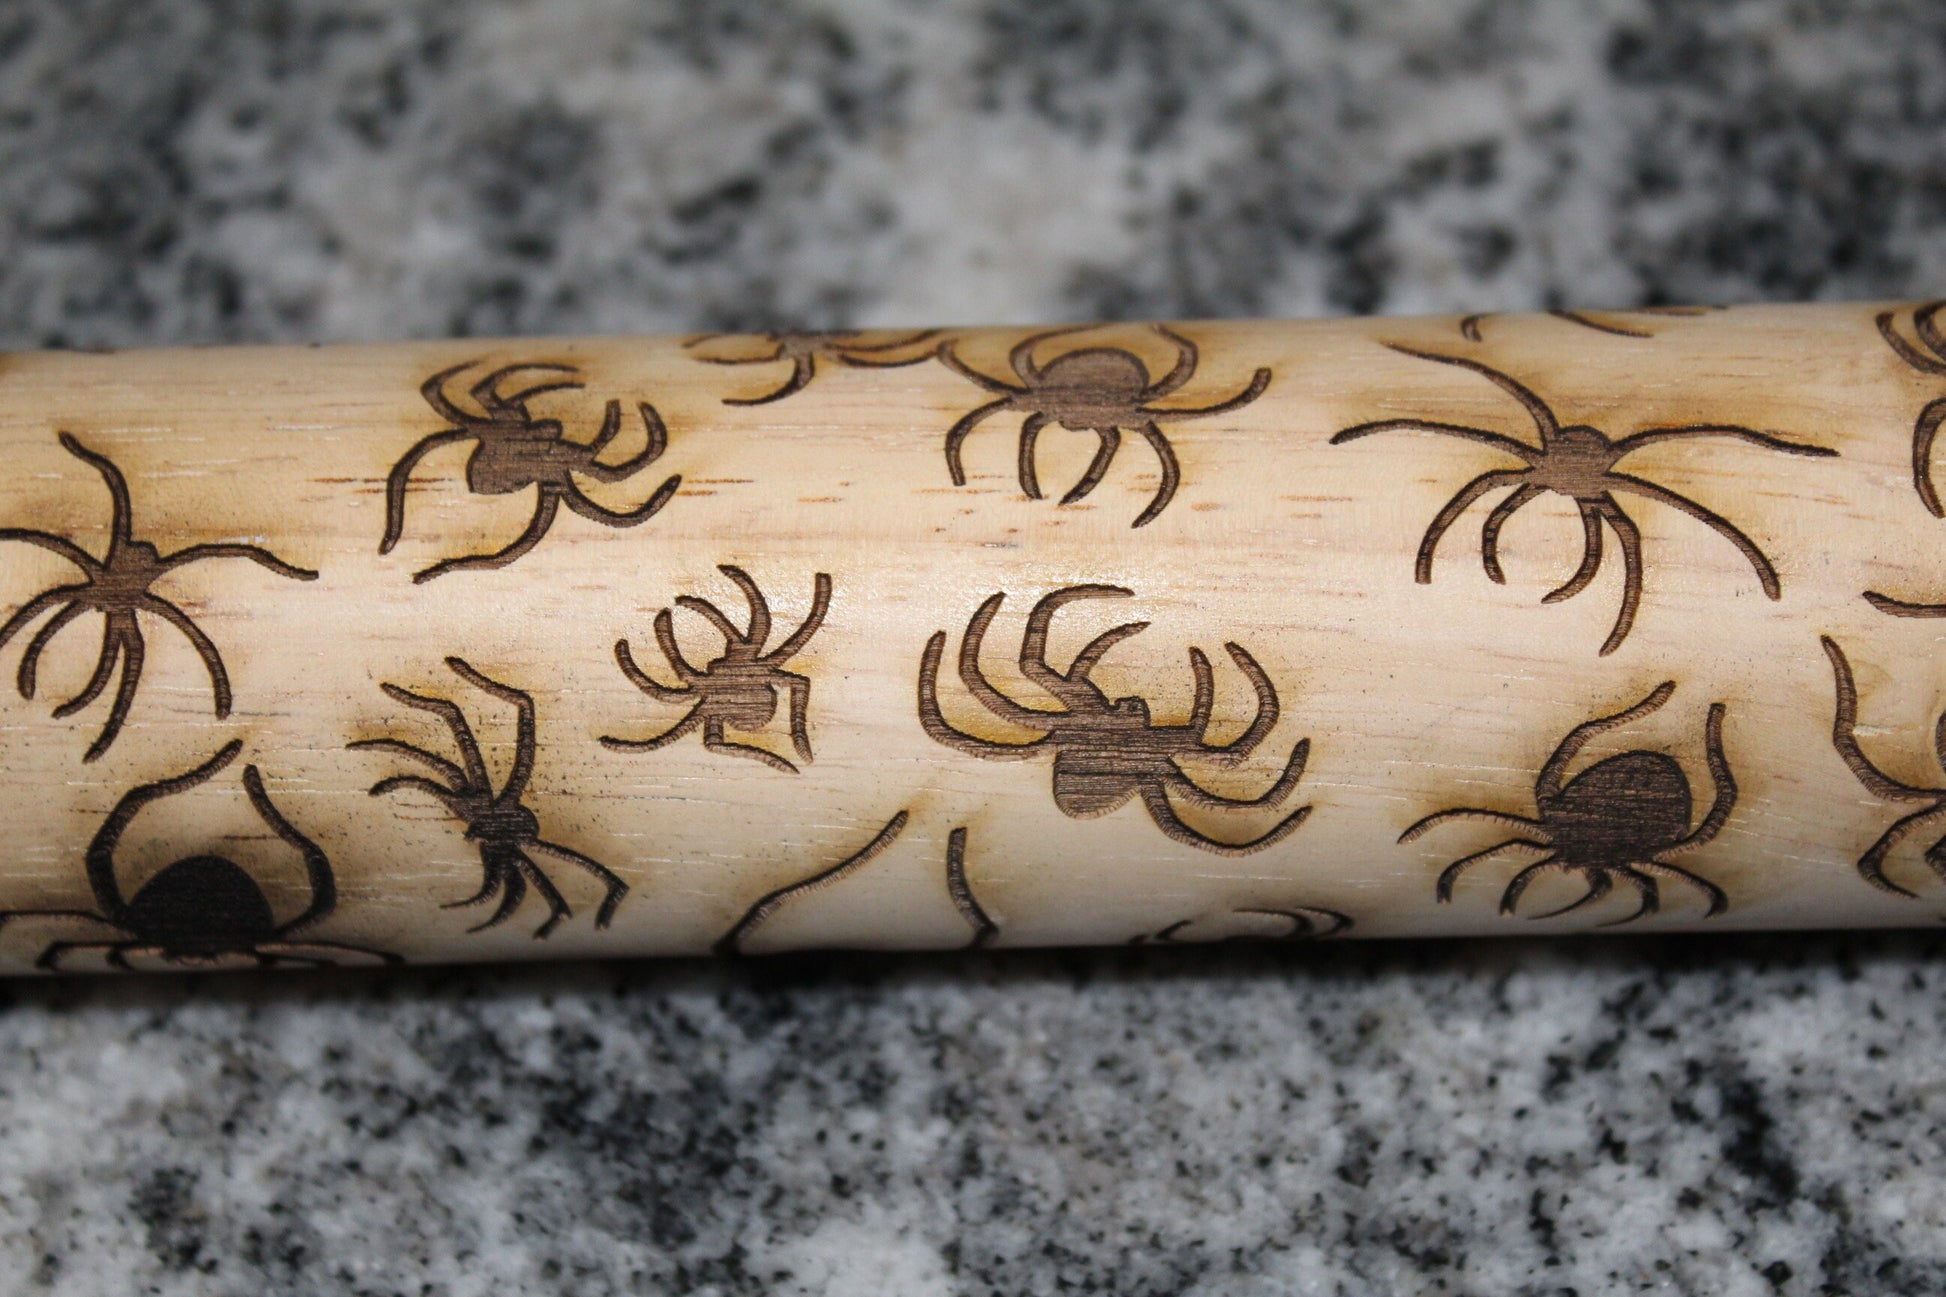 Spider Halloween Creepy Arachnid Bug Rolling Pin Texture Embossed Engraved Wooden Cookie Stamp Laser Pottery Clay Stamp Embossing Roller Art